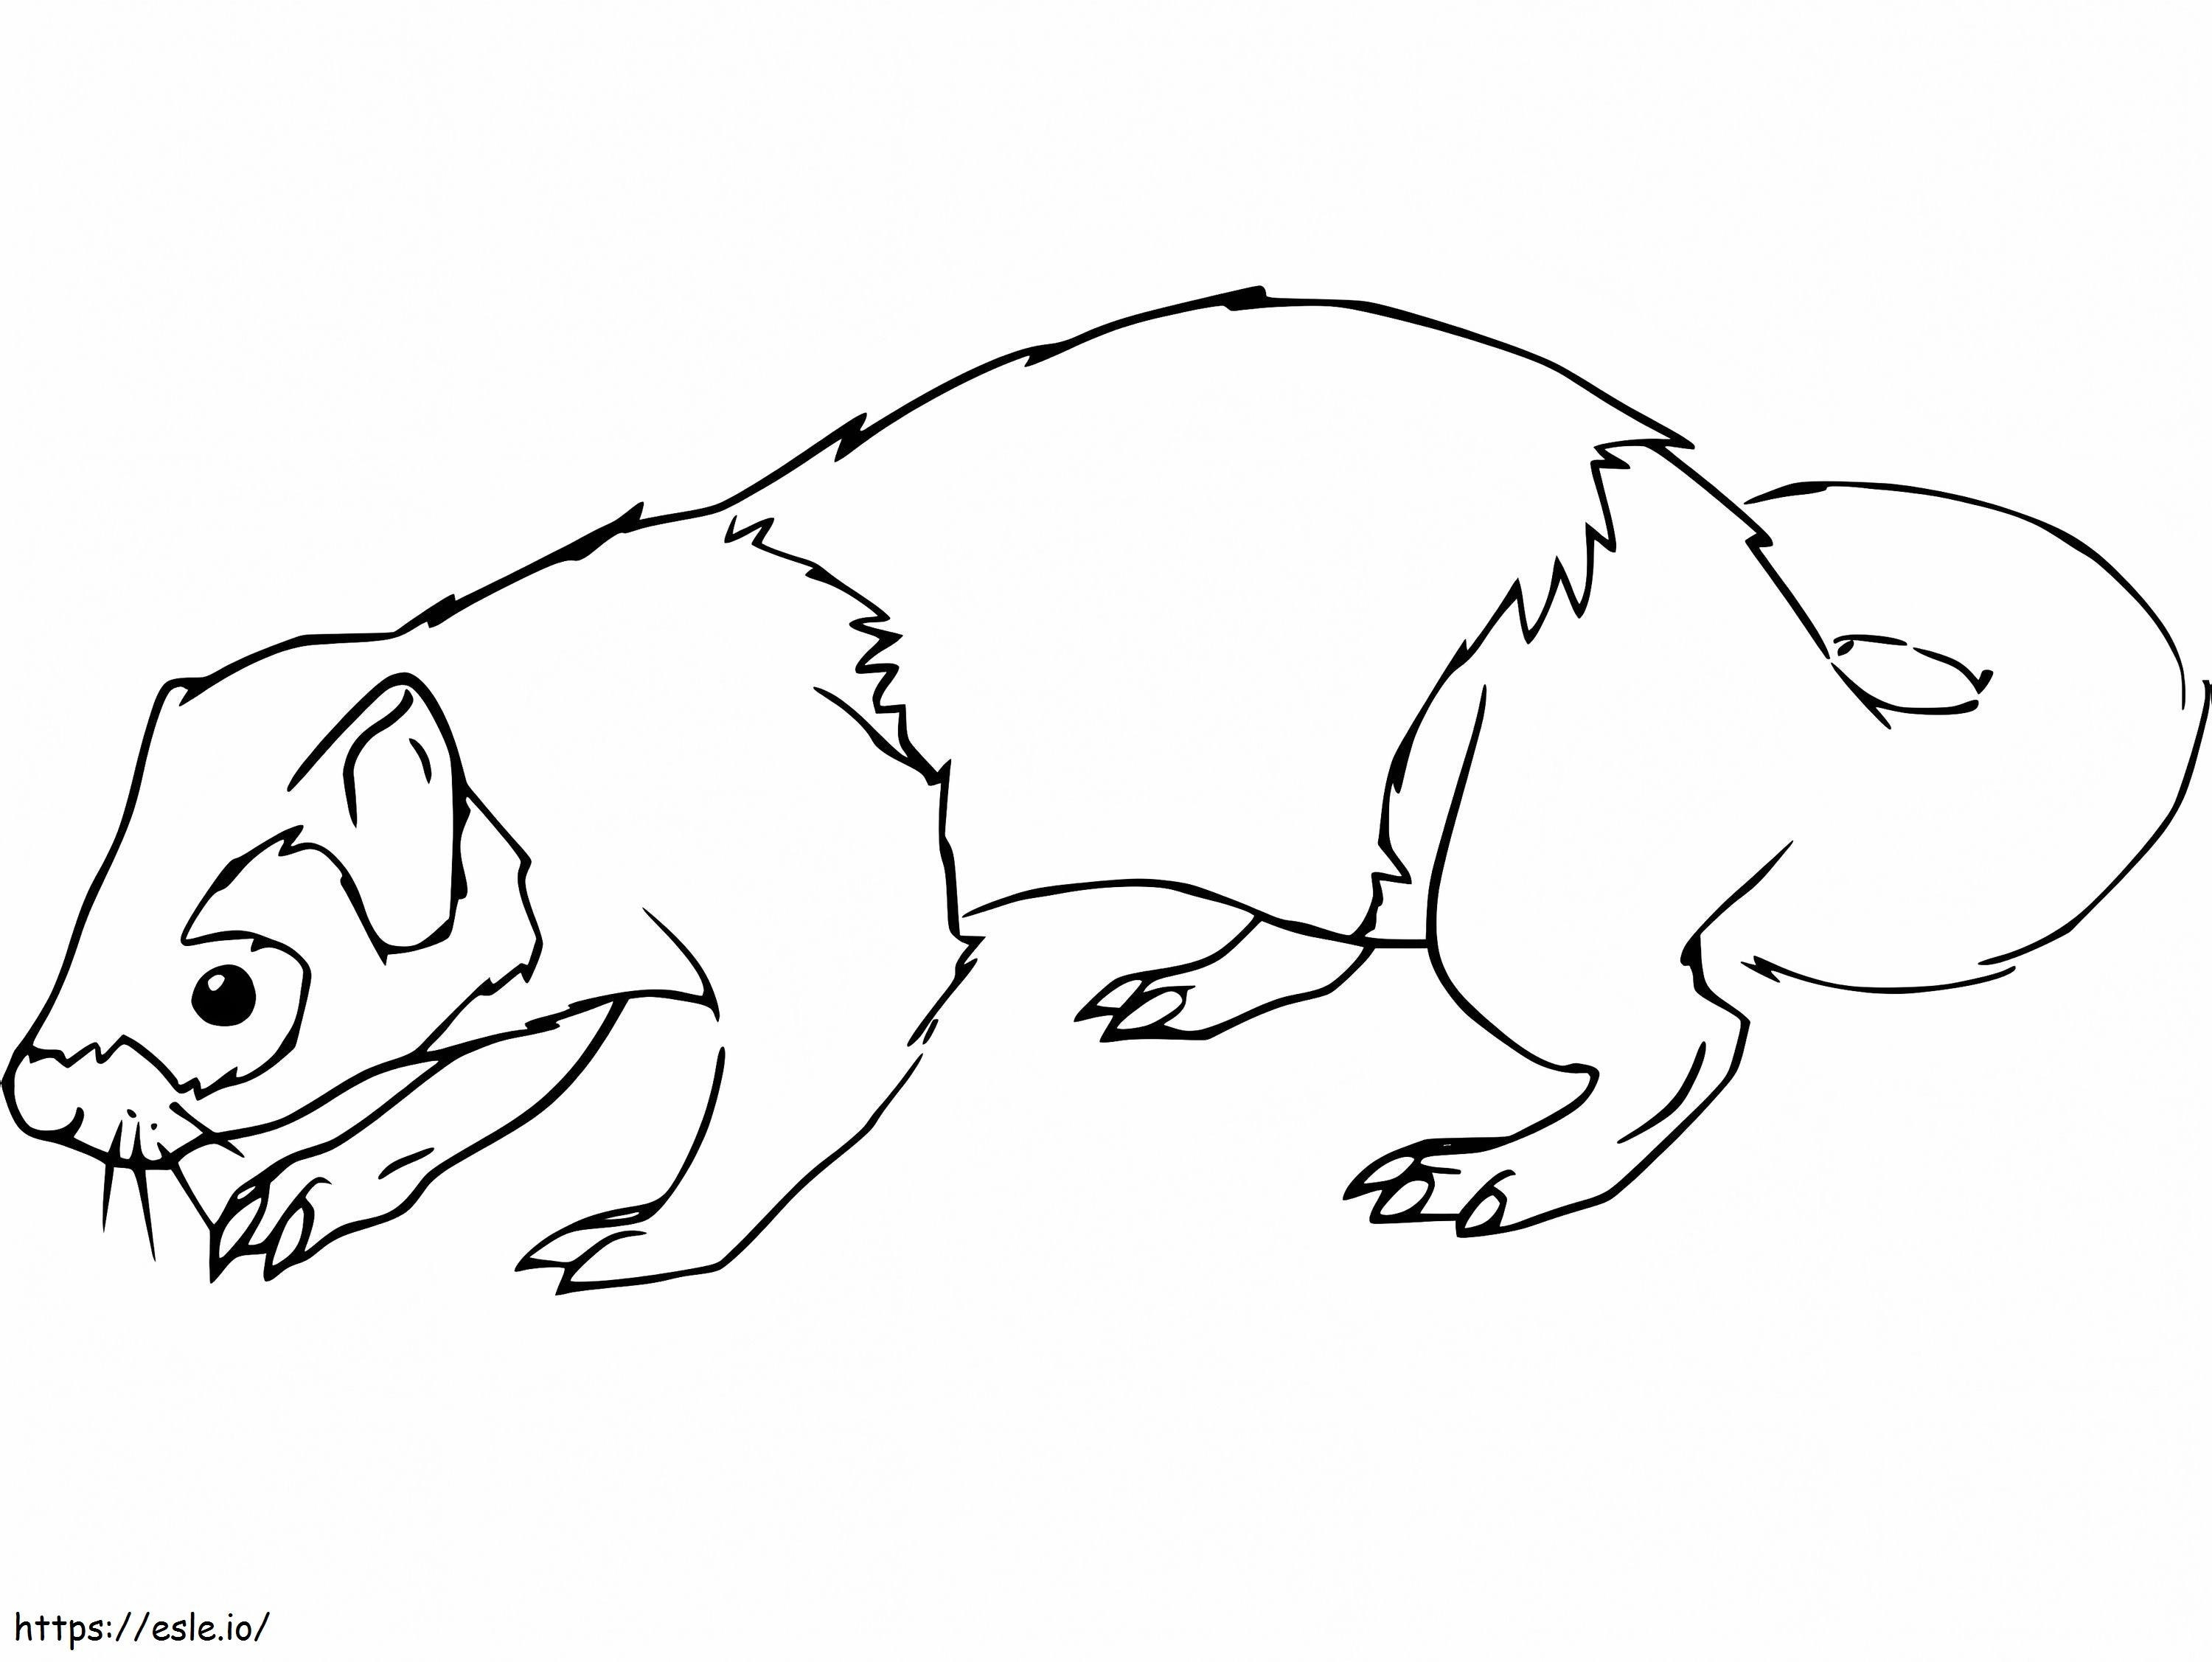 Weasel 10 coloring page